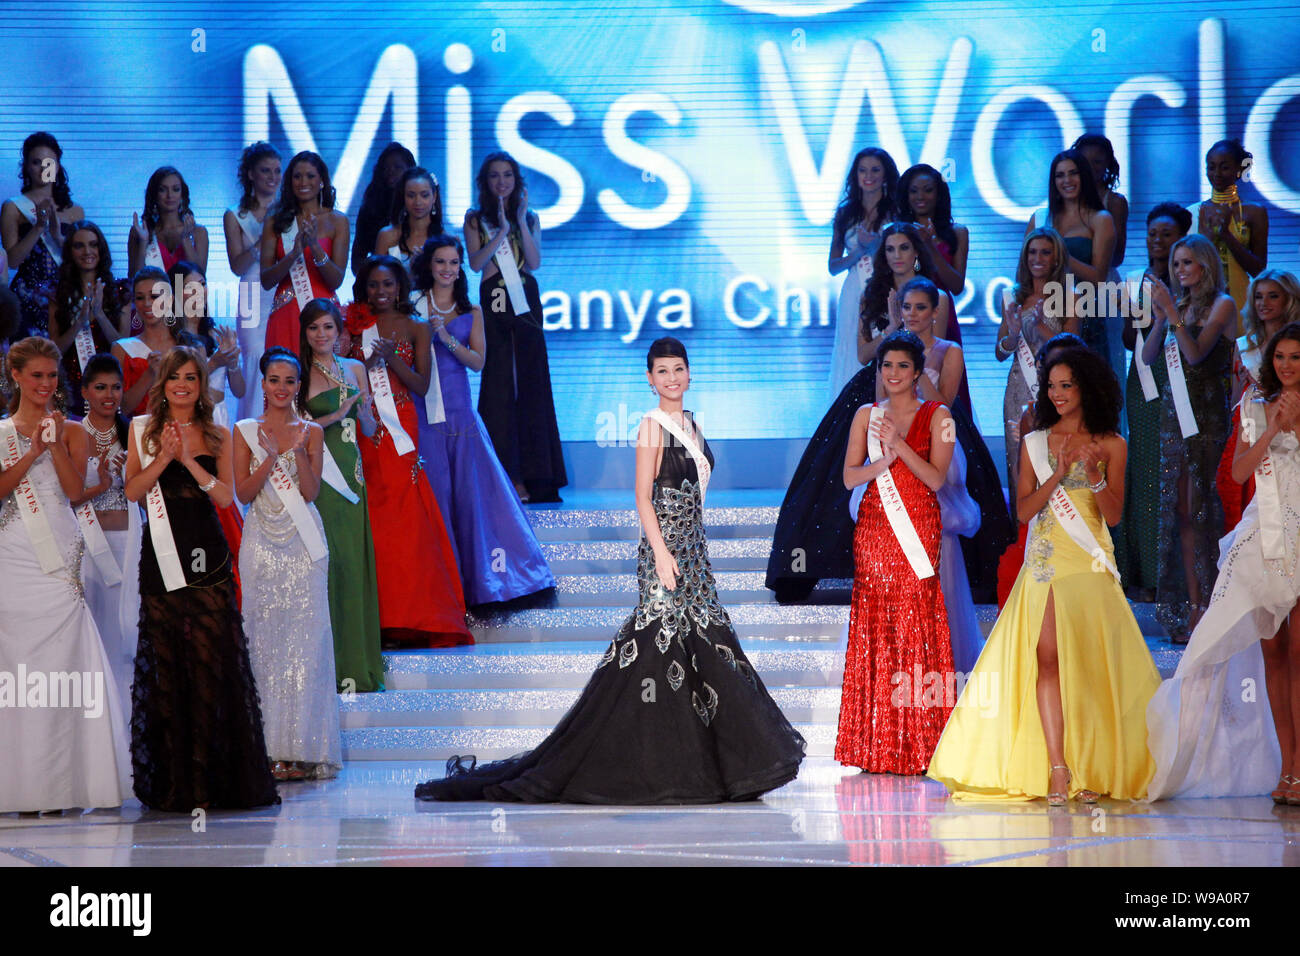 Contestants are seen during final of the Miss World 2010 in Sanya city, south Chinas Hainan province, 30 October 2010.   Teenager Alexandria Mills had Stock Photo